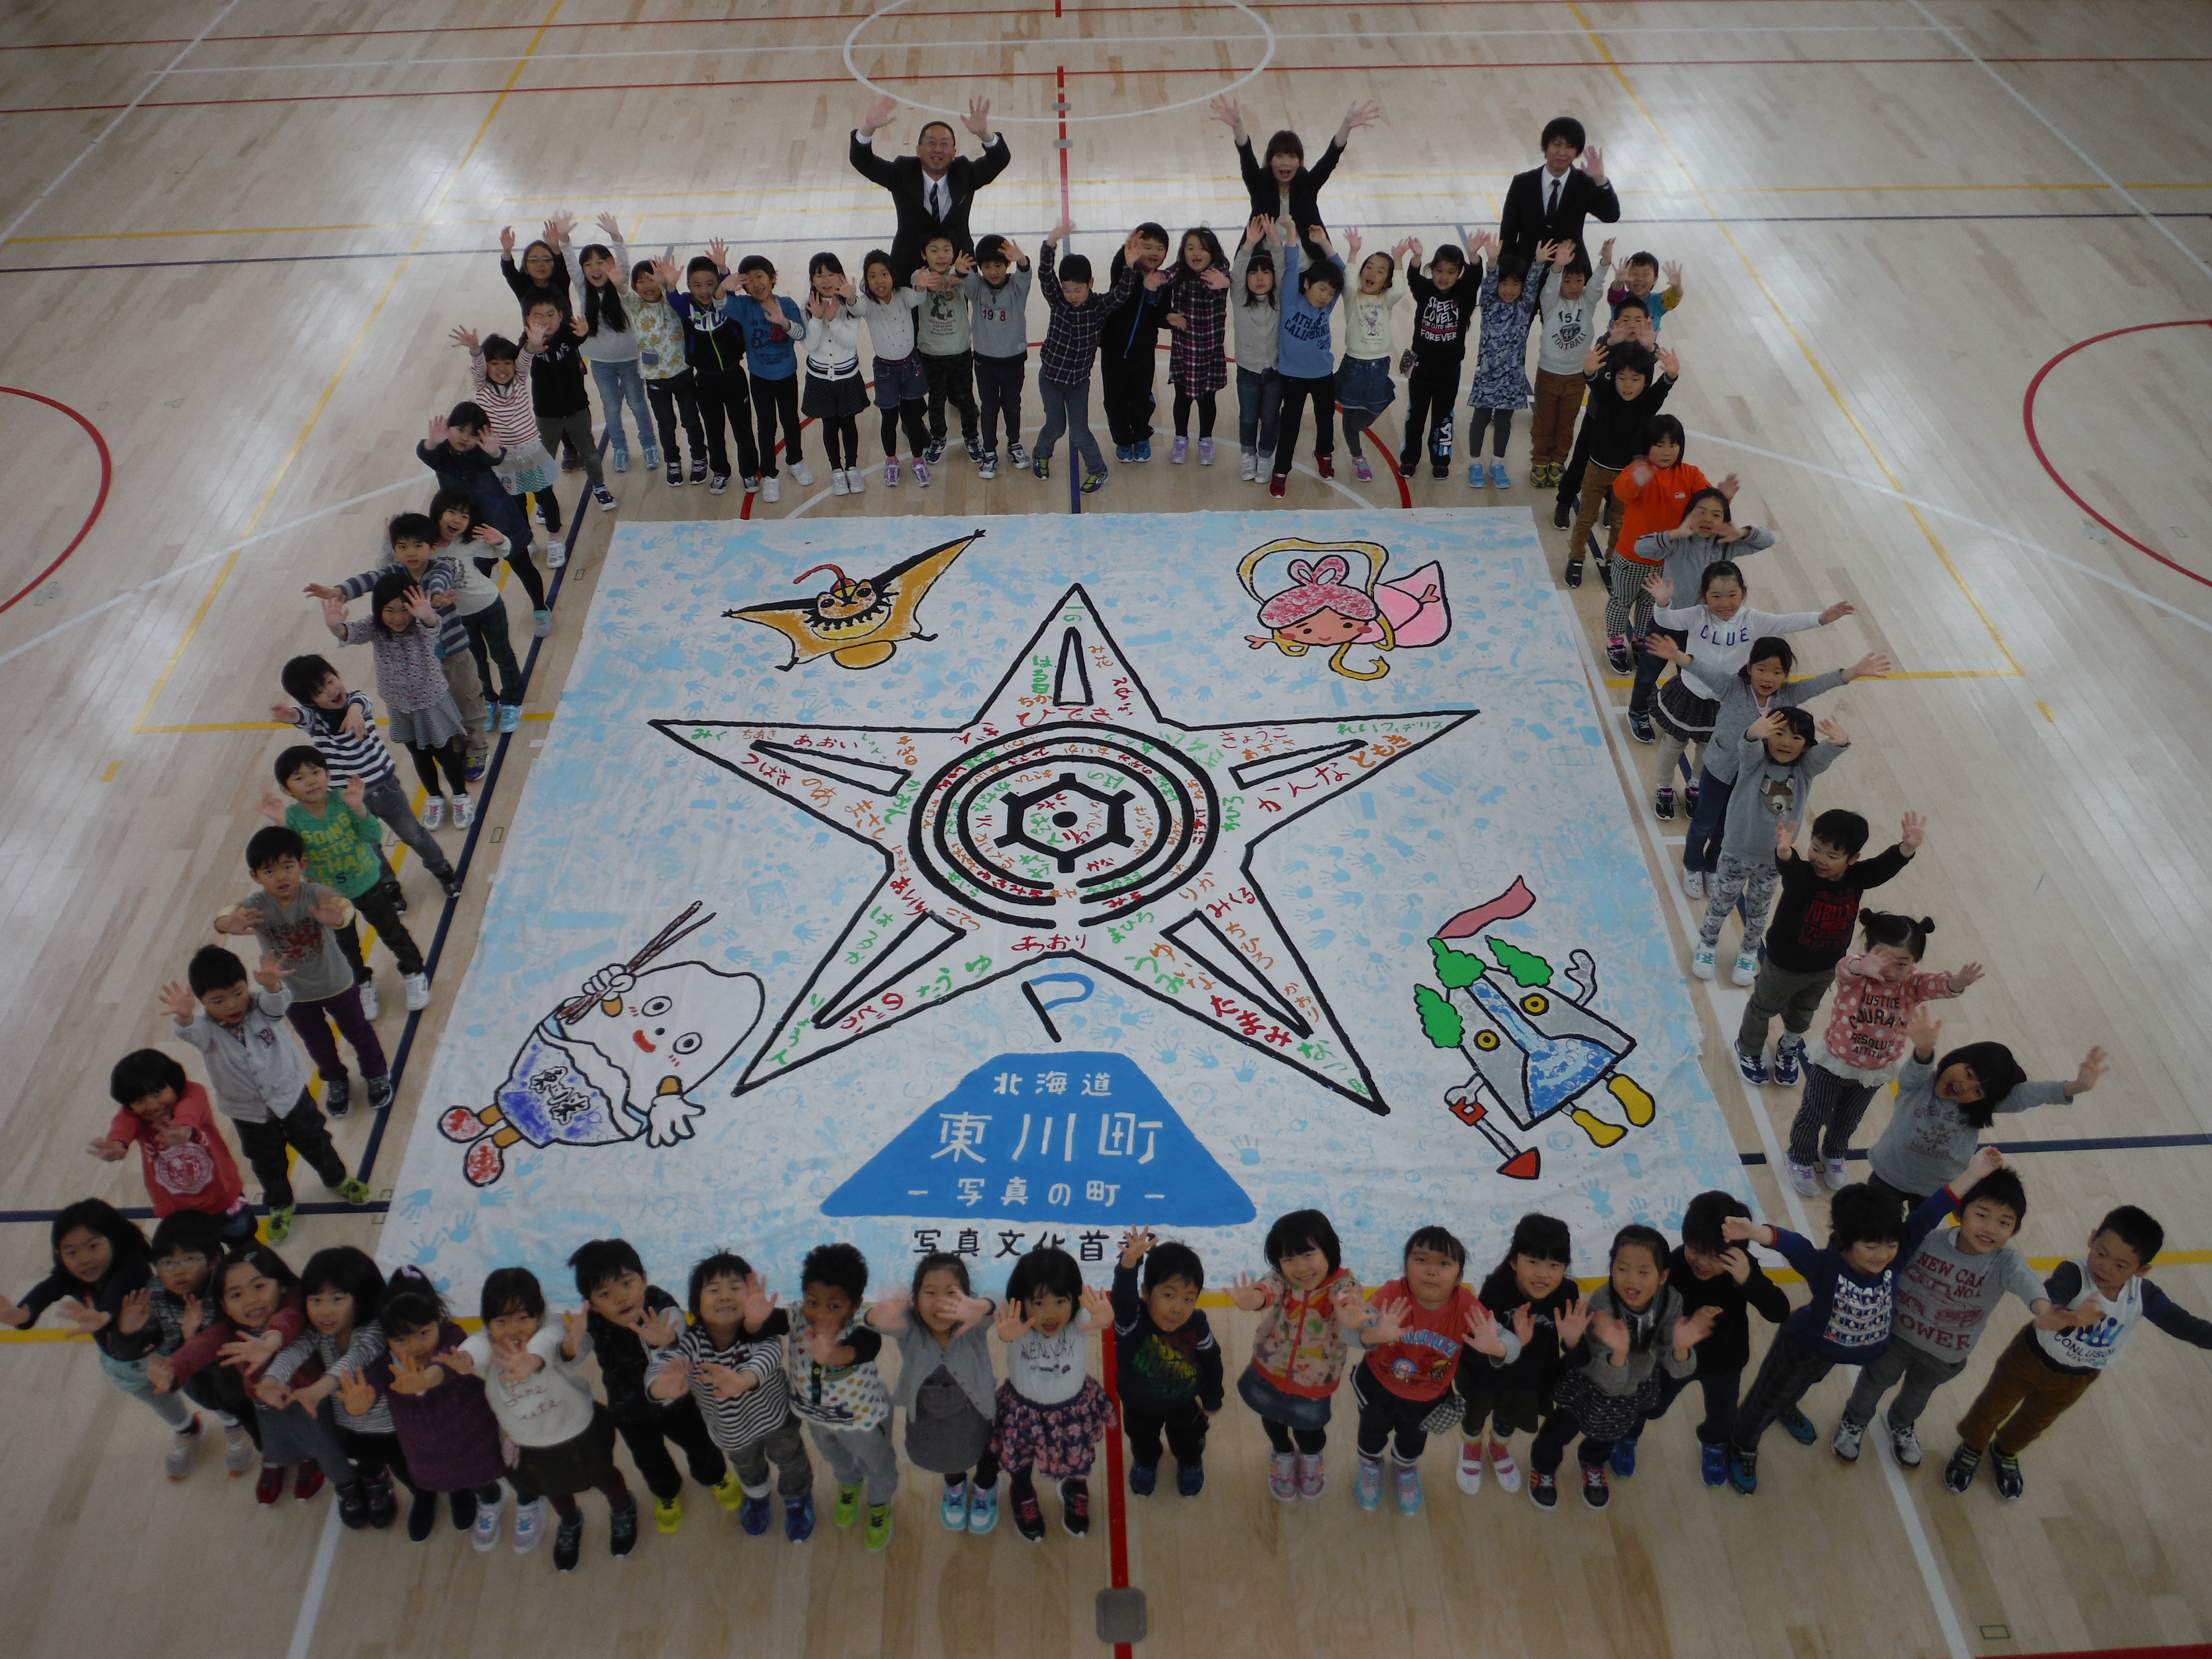 The Biggest Painting in the World 2020 Higashikawa town was completed